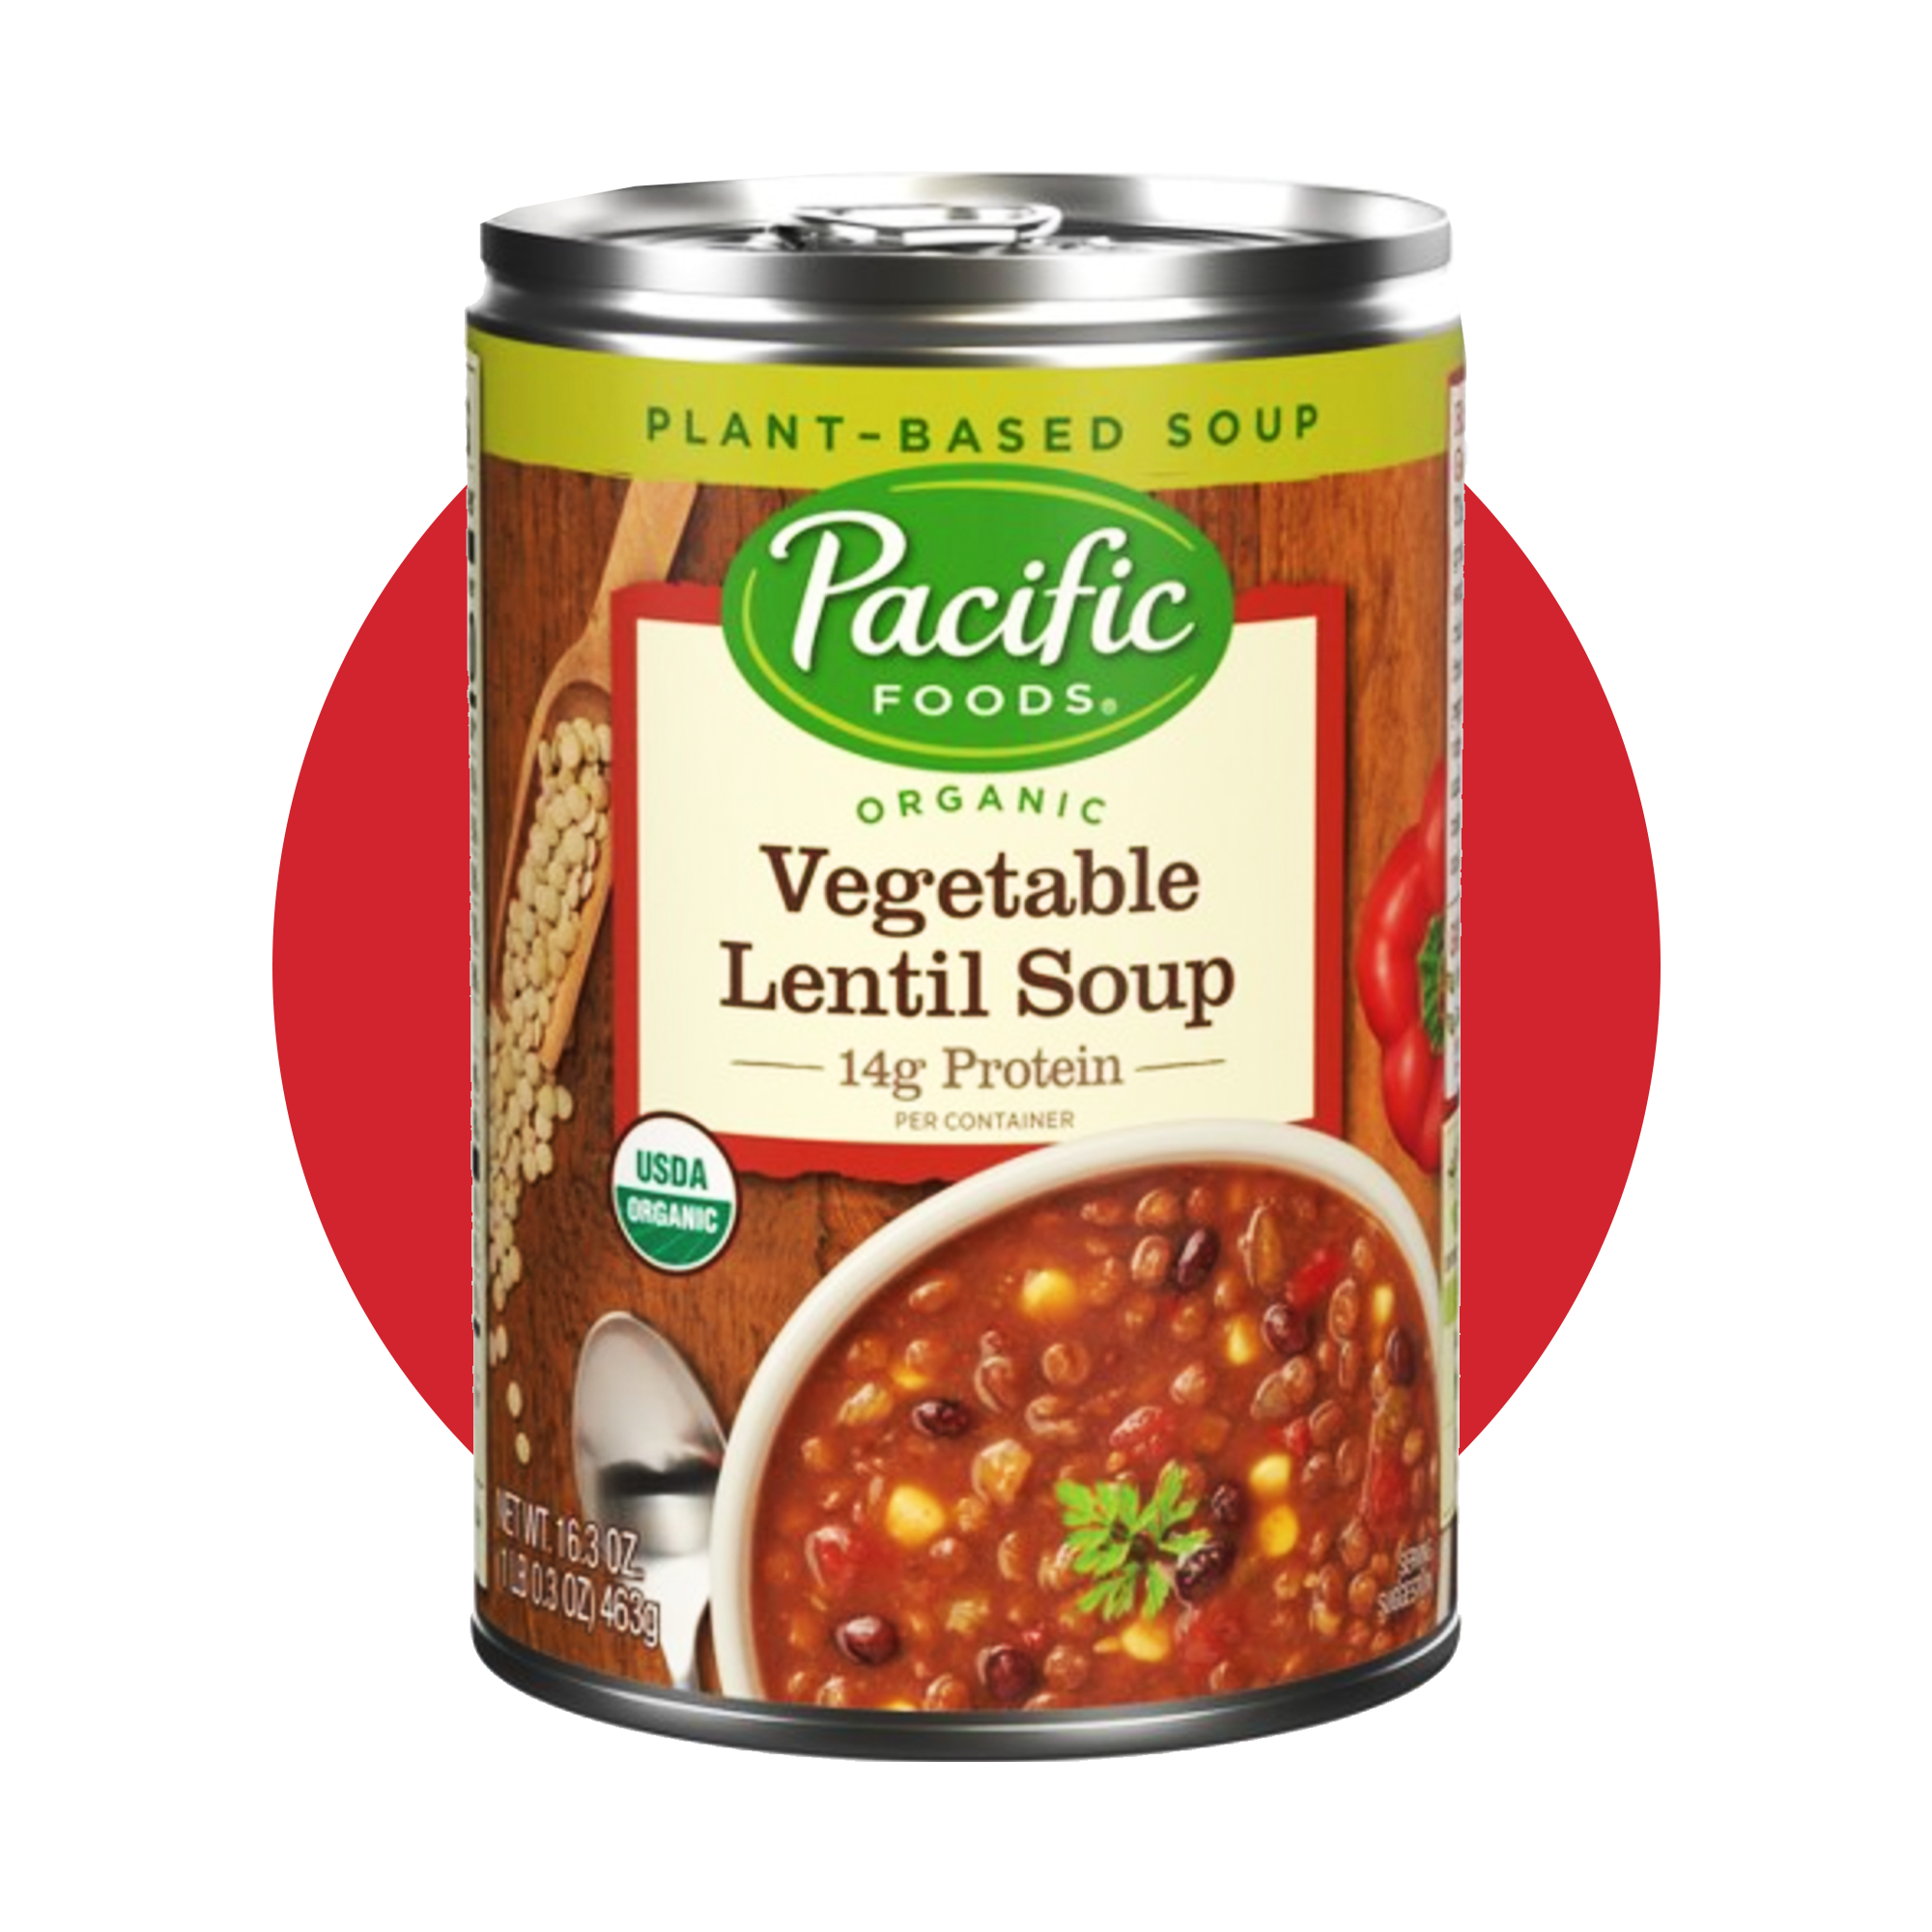 Pacific Foods Organic Vegan Lentil Soup and Roasted Red Peppers